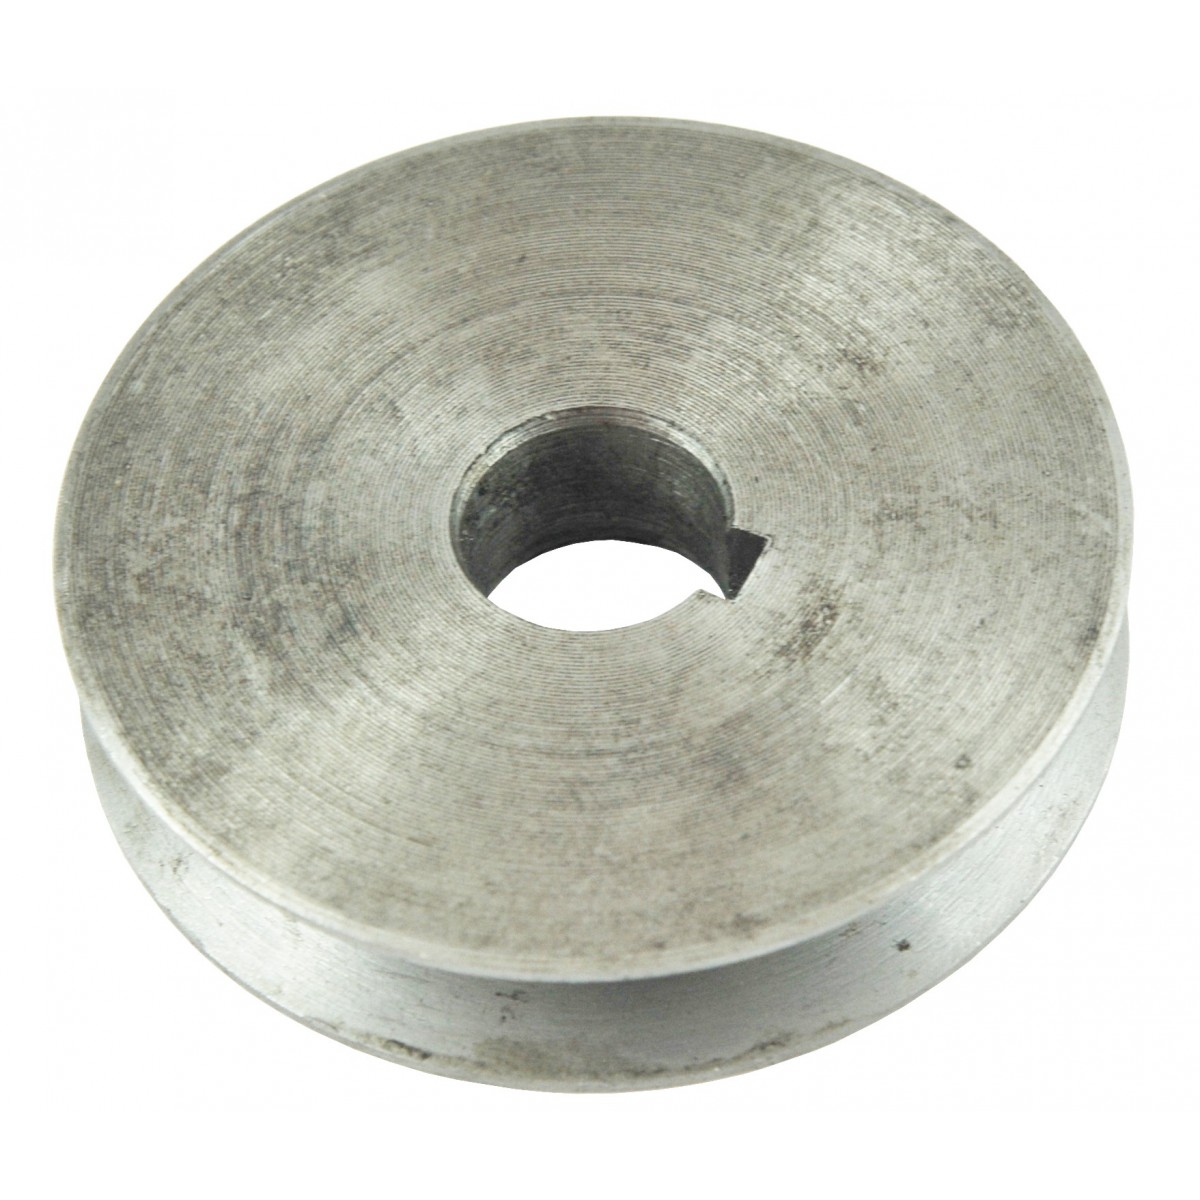 WC8, W.R.G. chipper drive pulley